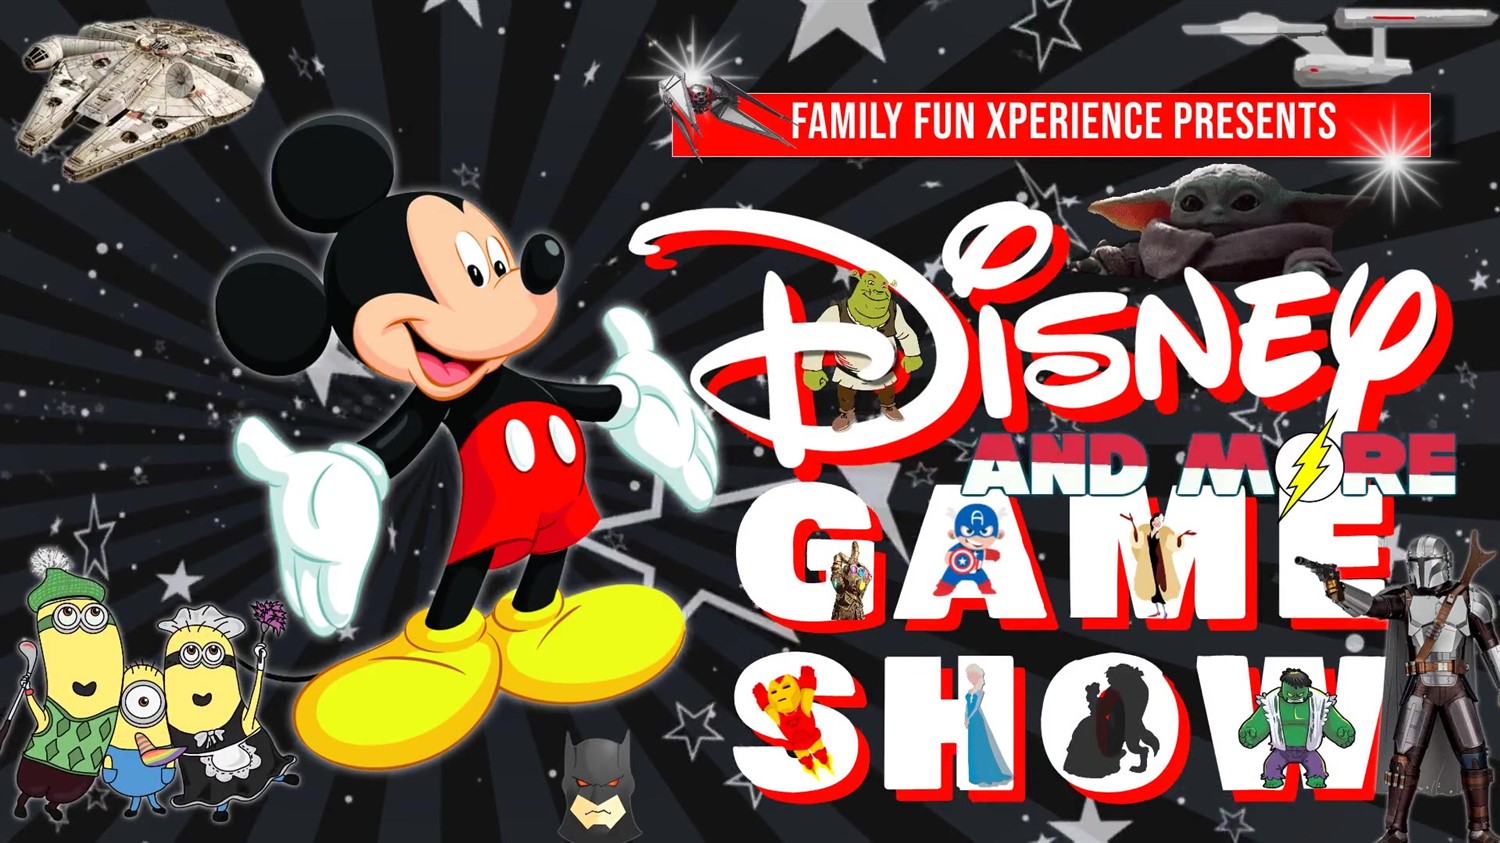 DISNEY & MORE GAME SHOW Animation, movies, sci-fi, superheroes, & much more! on Aug 23, 19:00@FFX Theatre - Pick a seat, Buy tickets and Get information on Family Fun Xperience tickets.ffxshow.org